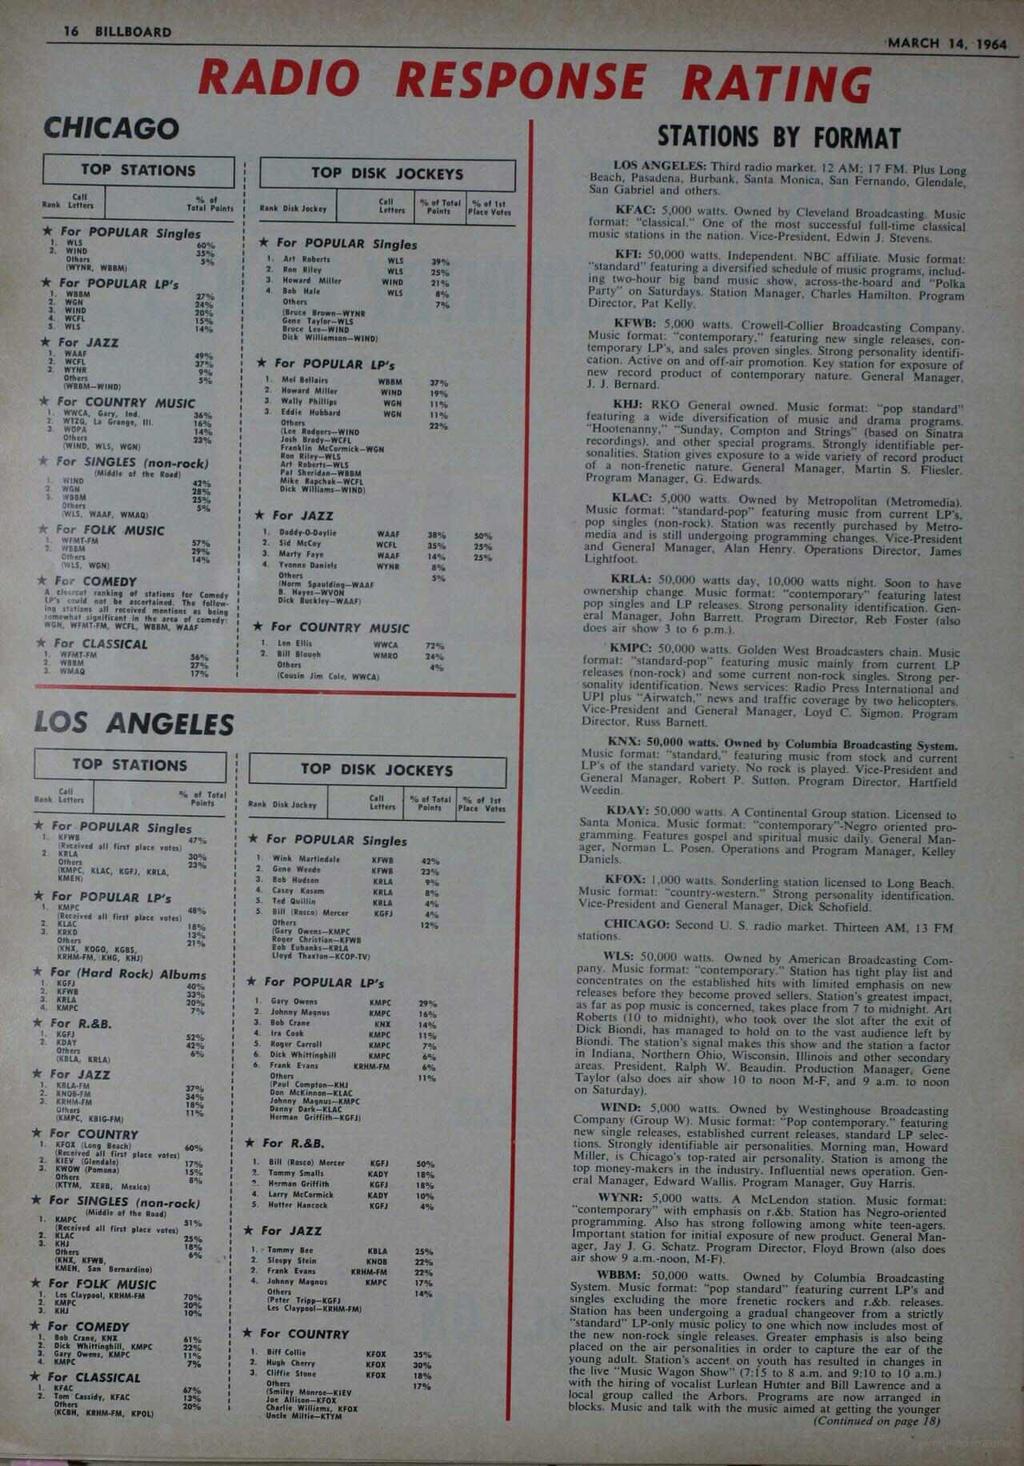 16 BILLBOARD MARCH 14, 1964 RADIO RESPONSE RATING CHICAGO TOP STATIONS CaH Rank fellers % of Total Pointy * For POPULAR Singles WLS 60% 1. WIND 33% Others 5% (WYNR. WBBMt * For POPULAR LP's 1.